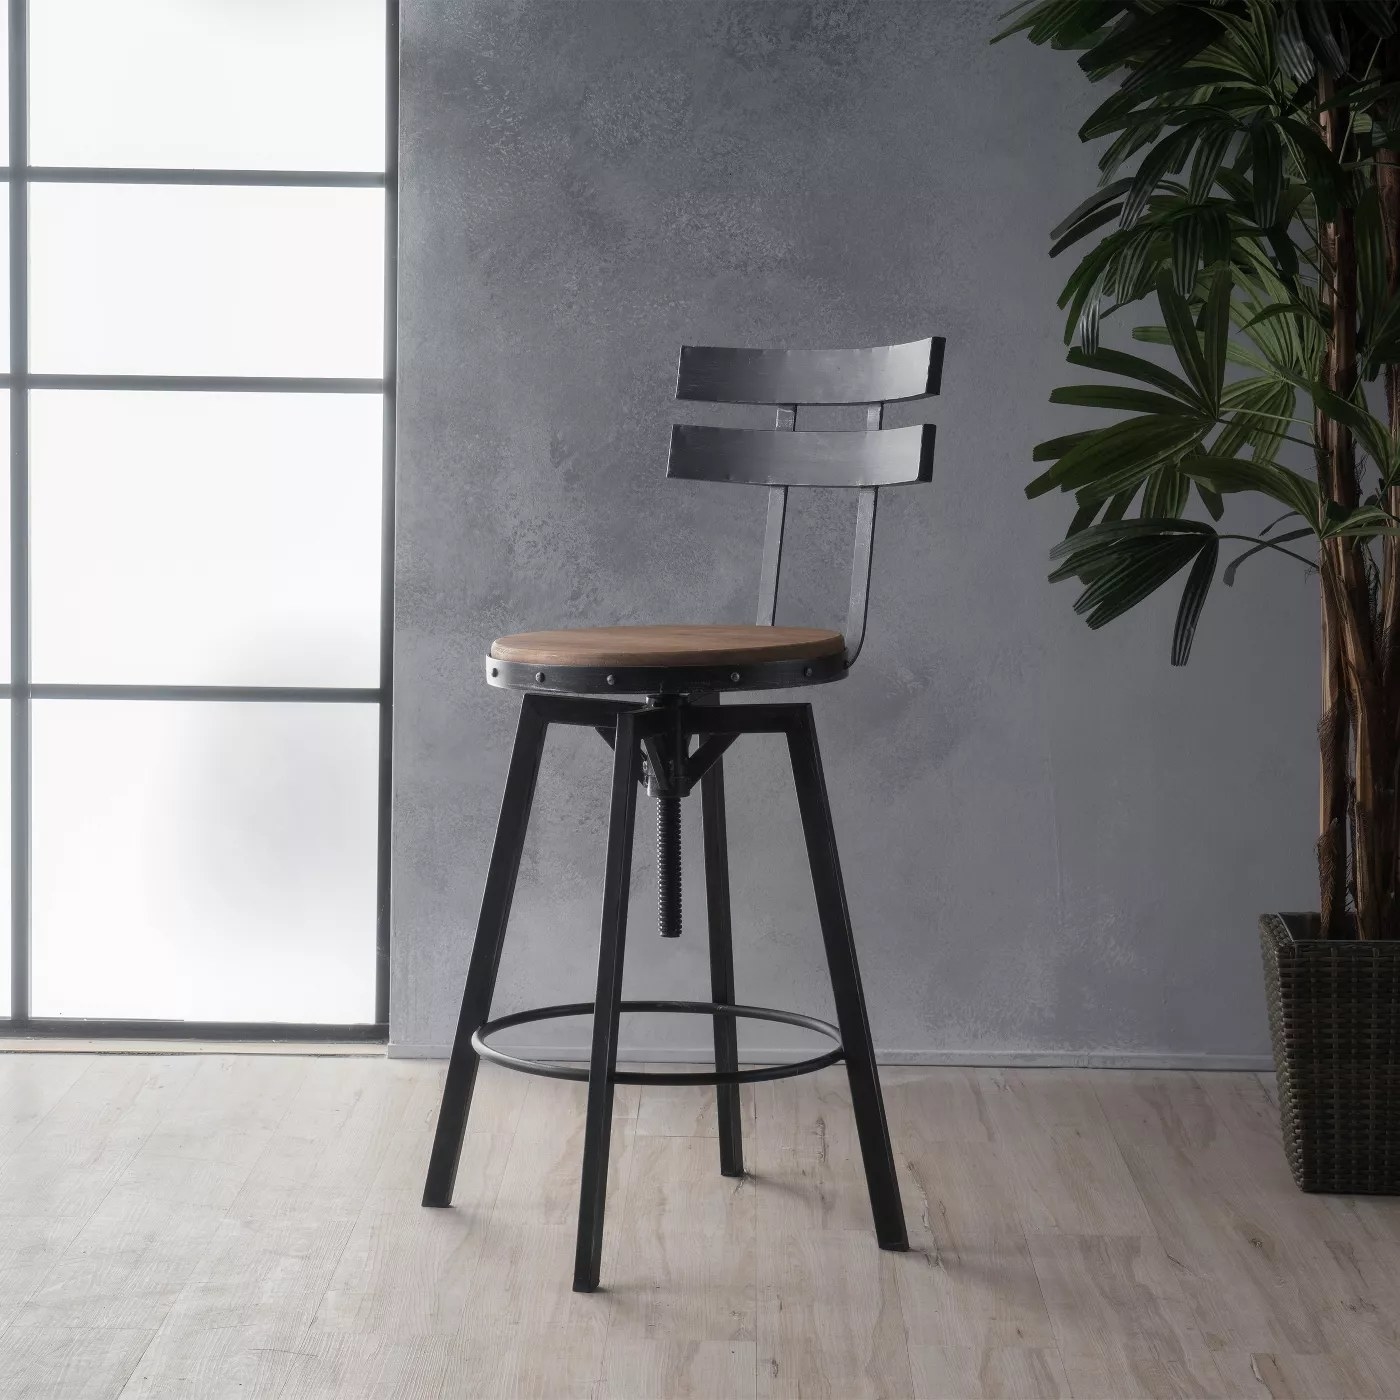 The barstool with a black frame and a wood seat